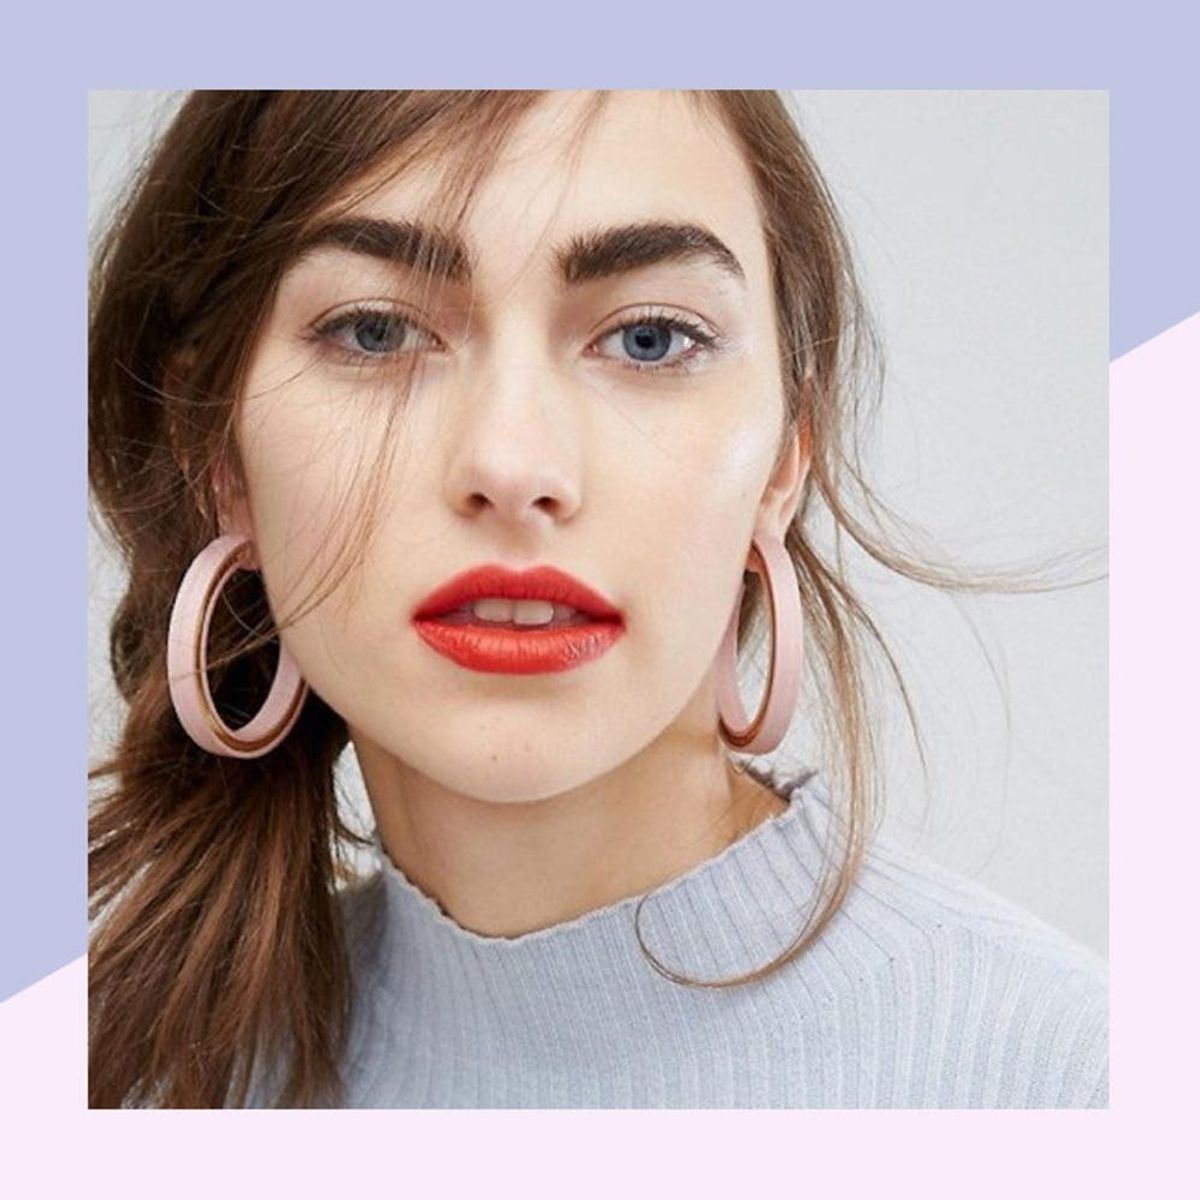 Hoop Earrings Are the Spring 2017 Jewelry Trend You Need